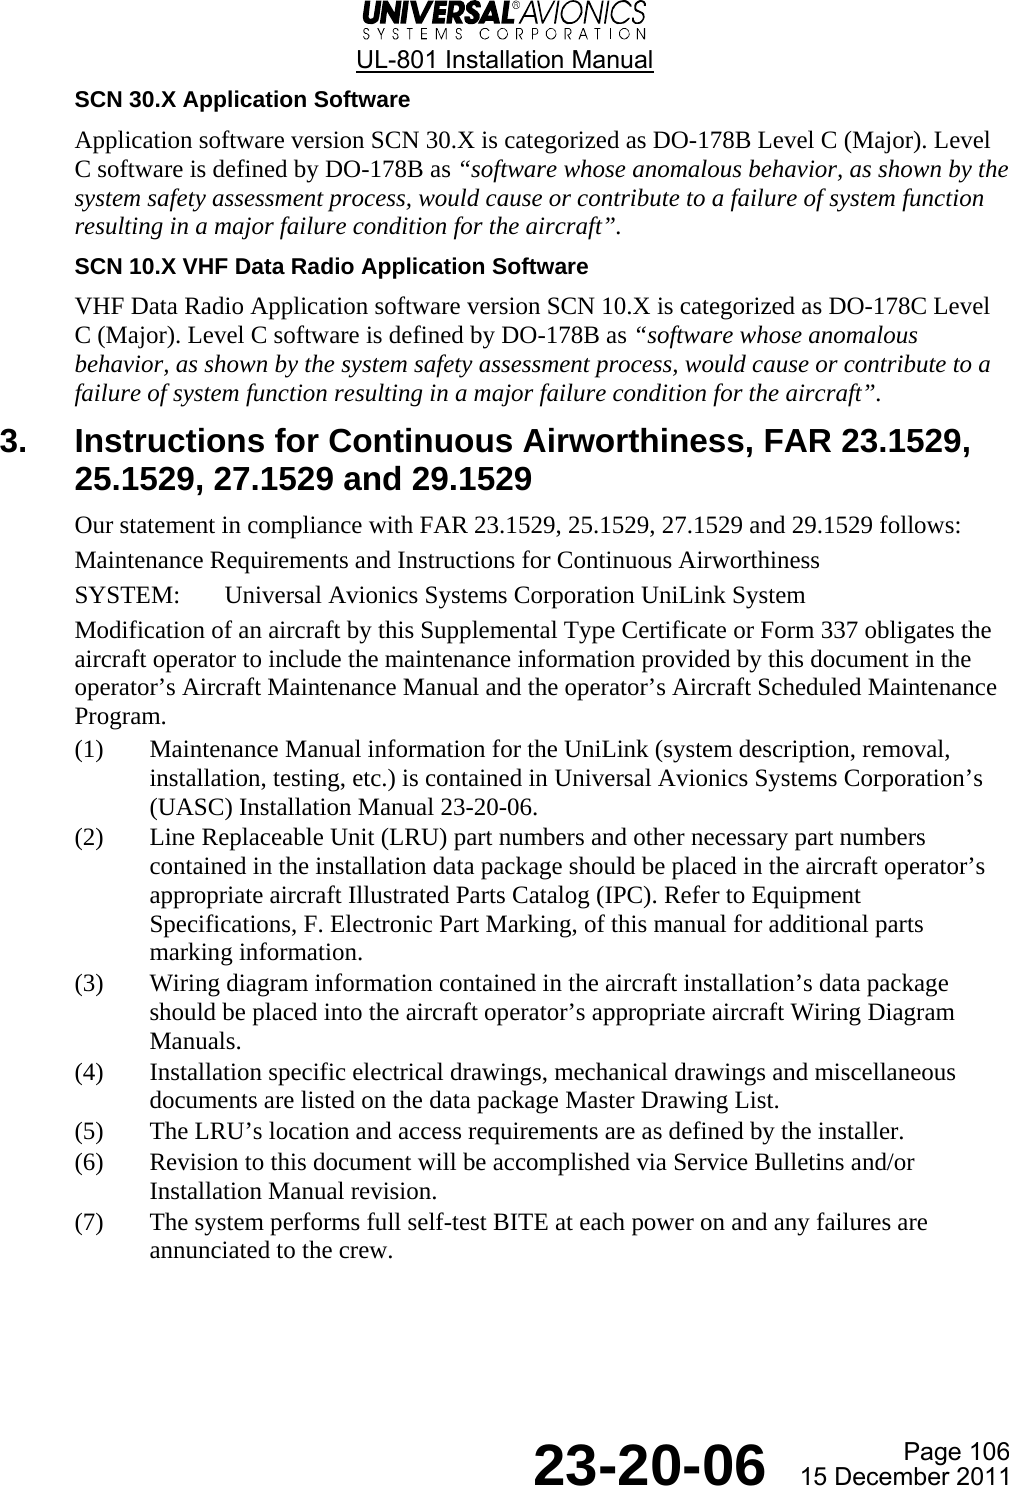  UL-801 Installation Manual Page 106  23-20-06  15 December 2011 SCN 30.X Application Software Application software version SCN 30.X is categorized as DO-178B Level C (Major). Level C software is defined by DO-178B as “software whose anomalous behavior, as shown by the system safety assessment process, would cause or contribute to a failure of system function resulting in a major failure condition for the aircraft”. SCN 10.X VHF Data Radio Application Software VHF Data Radio Application software version SCN 10.X is categorized as DO-178C Level C (Major). Level C software is defined by DO-178B as “software whose anomalous behavior, as shown by the system safety assessment process, would cause or contribute to a failure of system function resulting in a major failure condition for the aircraft”. 3.  Instructions for Continuous Airworthiness, FAR 23.1529, 25.1529, 27.1529 and 29.1529 Our statement in compliance with FAR 23.1529, 25.1529, 27.1529 and 29.1529 follows: Maintenance Requirements and Instructions for Continuous Airworthiness SYSTEM:  Universal Avionics Systems Corporation UniLink System Modification of an aircraft by this Supplemental Type Certificate or Form 337 obligates the aircraft operator to include the maintenance information provided by this document in the operator’s Aircraft Maintenance Manual and the operator’s Aircraft Scheduled Maintenance Program. (1) Maintenance Manual information for the UniLink (system description, removal, installation, testing, etc.) is contained in Universal Avionics Systems Corporation’s (UASC) Installation Manual 23-20-06. (2) Line Replaceable Unit (LRU) part numbers and other necessary part numbers contained in the installation data package should be placed in the aircraft operator’s appropriate aircraft Illustrated Parts Catalog (IPC). Refer to Equipment Specifications, F. Electronic Part Marking, of this manual for additional parts marking information. (3) Wiring diagram information contained in the aircraft installation’s data package should be placed into the aircraft operator’s appropriate aircraft Wiring Diagram Manuals. (4) Installation specific electrical drawings, mechanical drawings and miscellaneous documents are listed on the data package Master Drawing List. (5) The LRU’s location and access requirements are as defined by the installer. (6) Revision to this document will be accomplished via Service Bulletins and/or Installation Manual revision. (7) The system performs full self-test BITE at each power on and any failures are annunciated to the crew.   